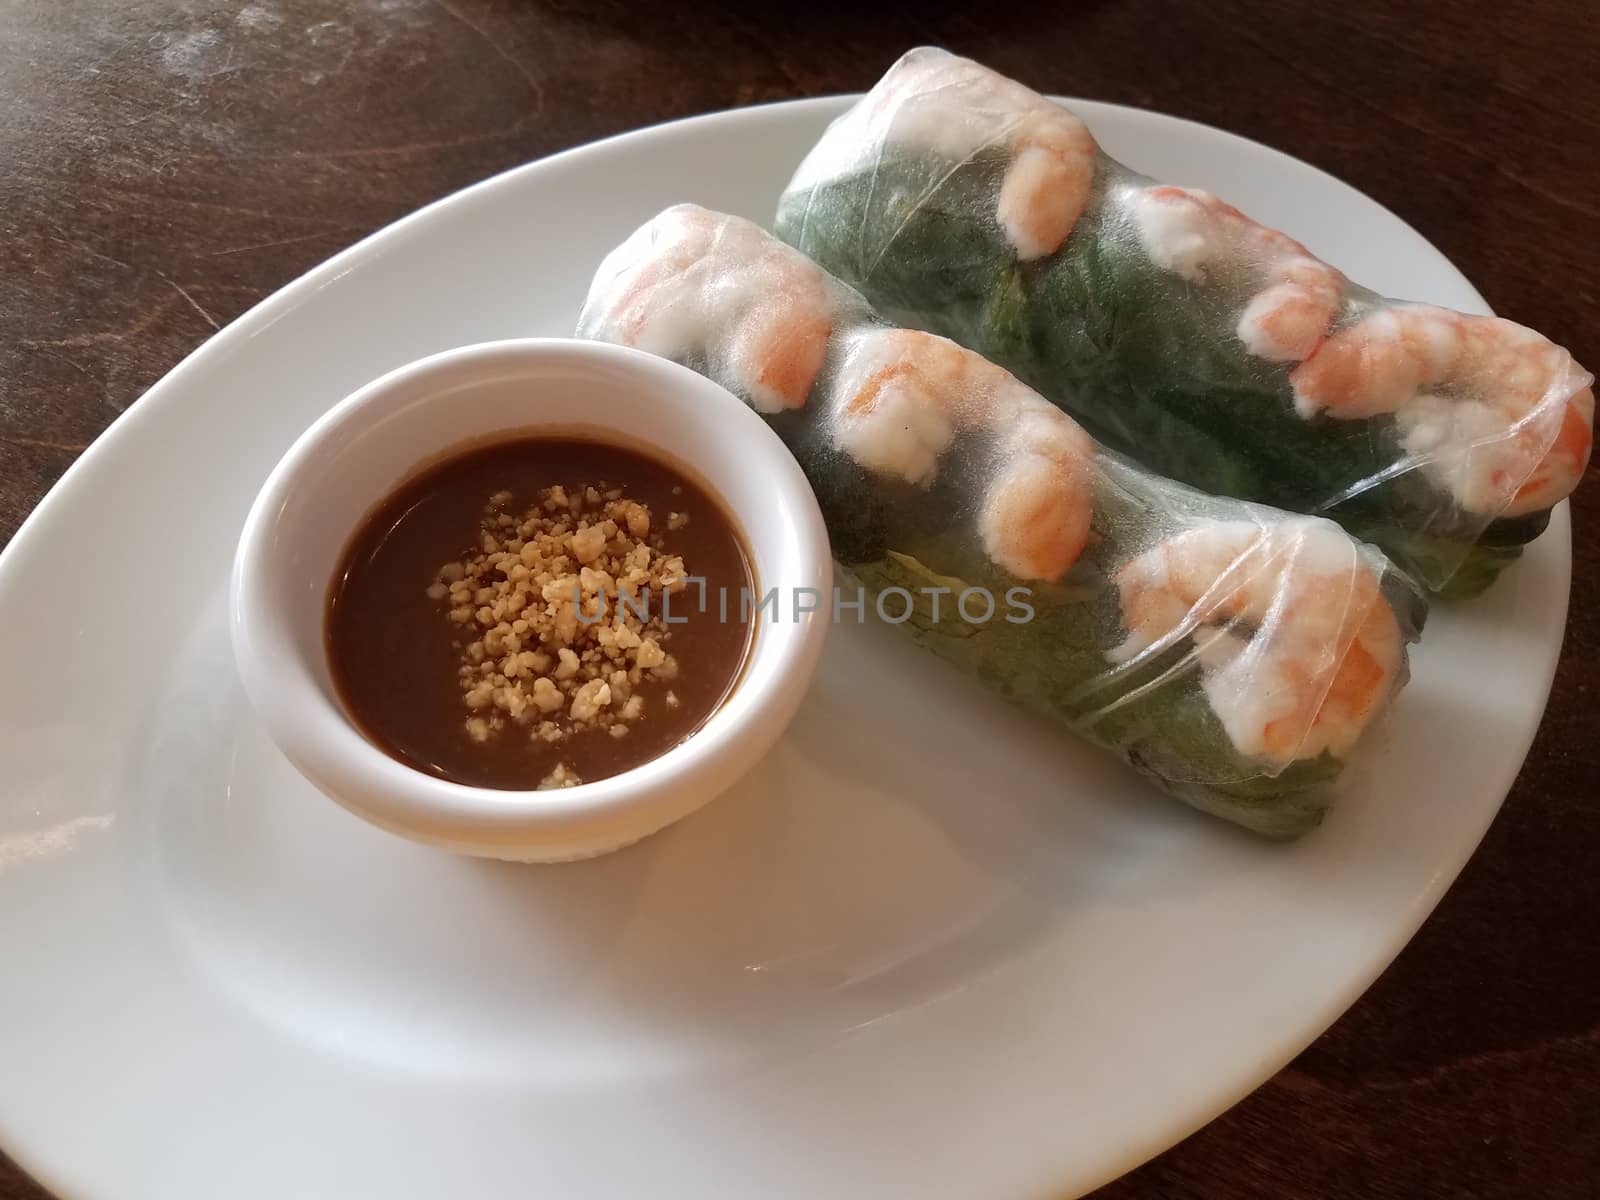 Vietnamese rice paper rolls with shrimp and dipping sauce by stockphotofan1